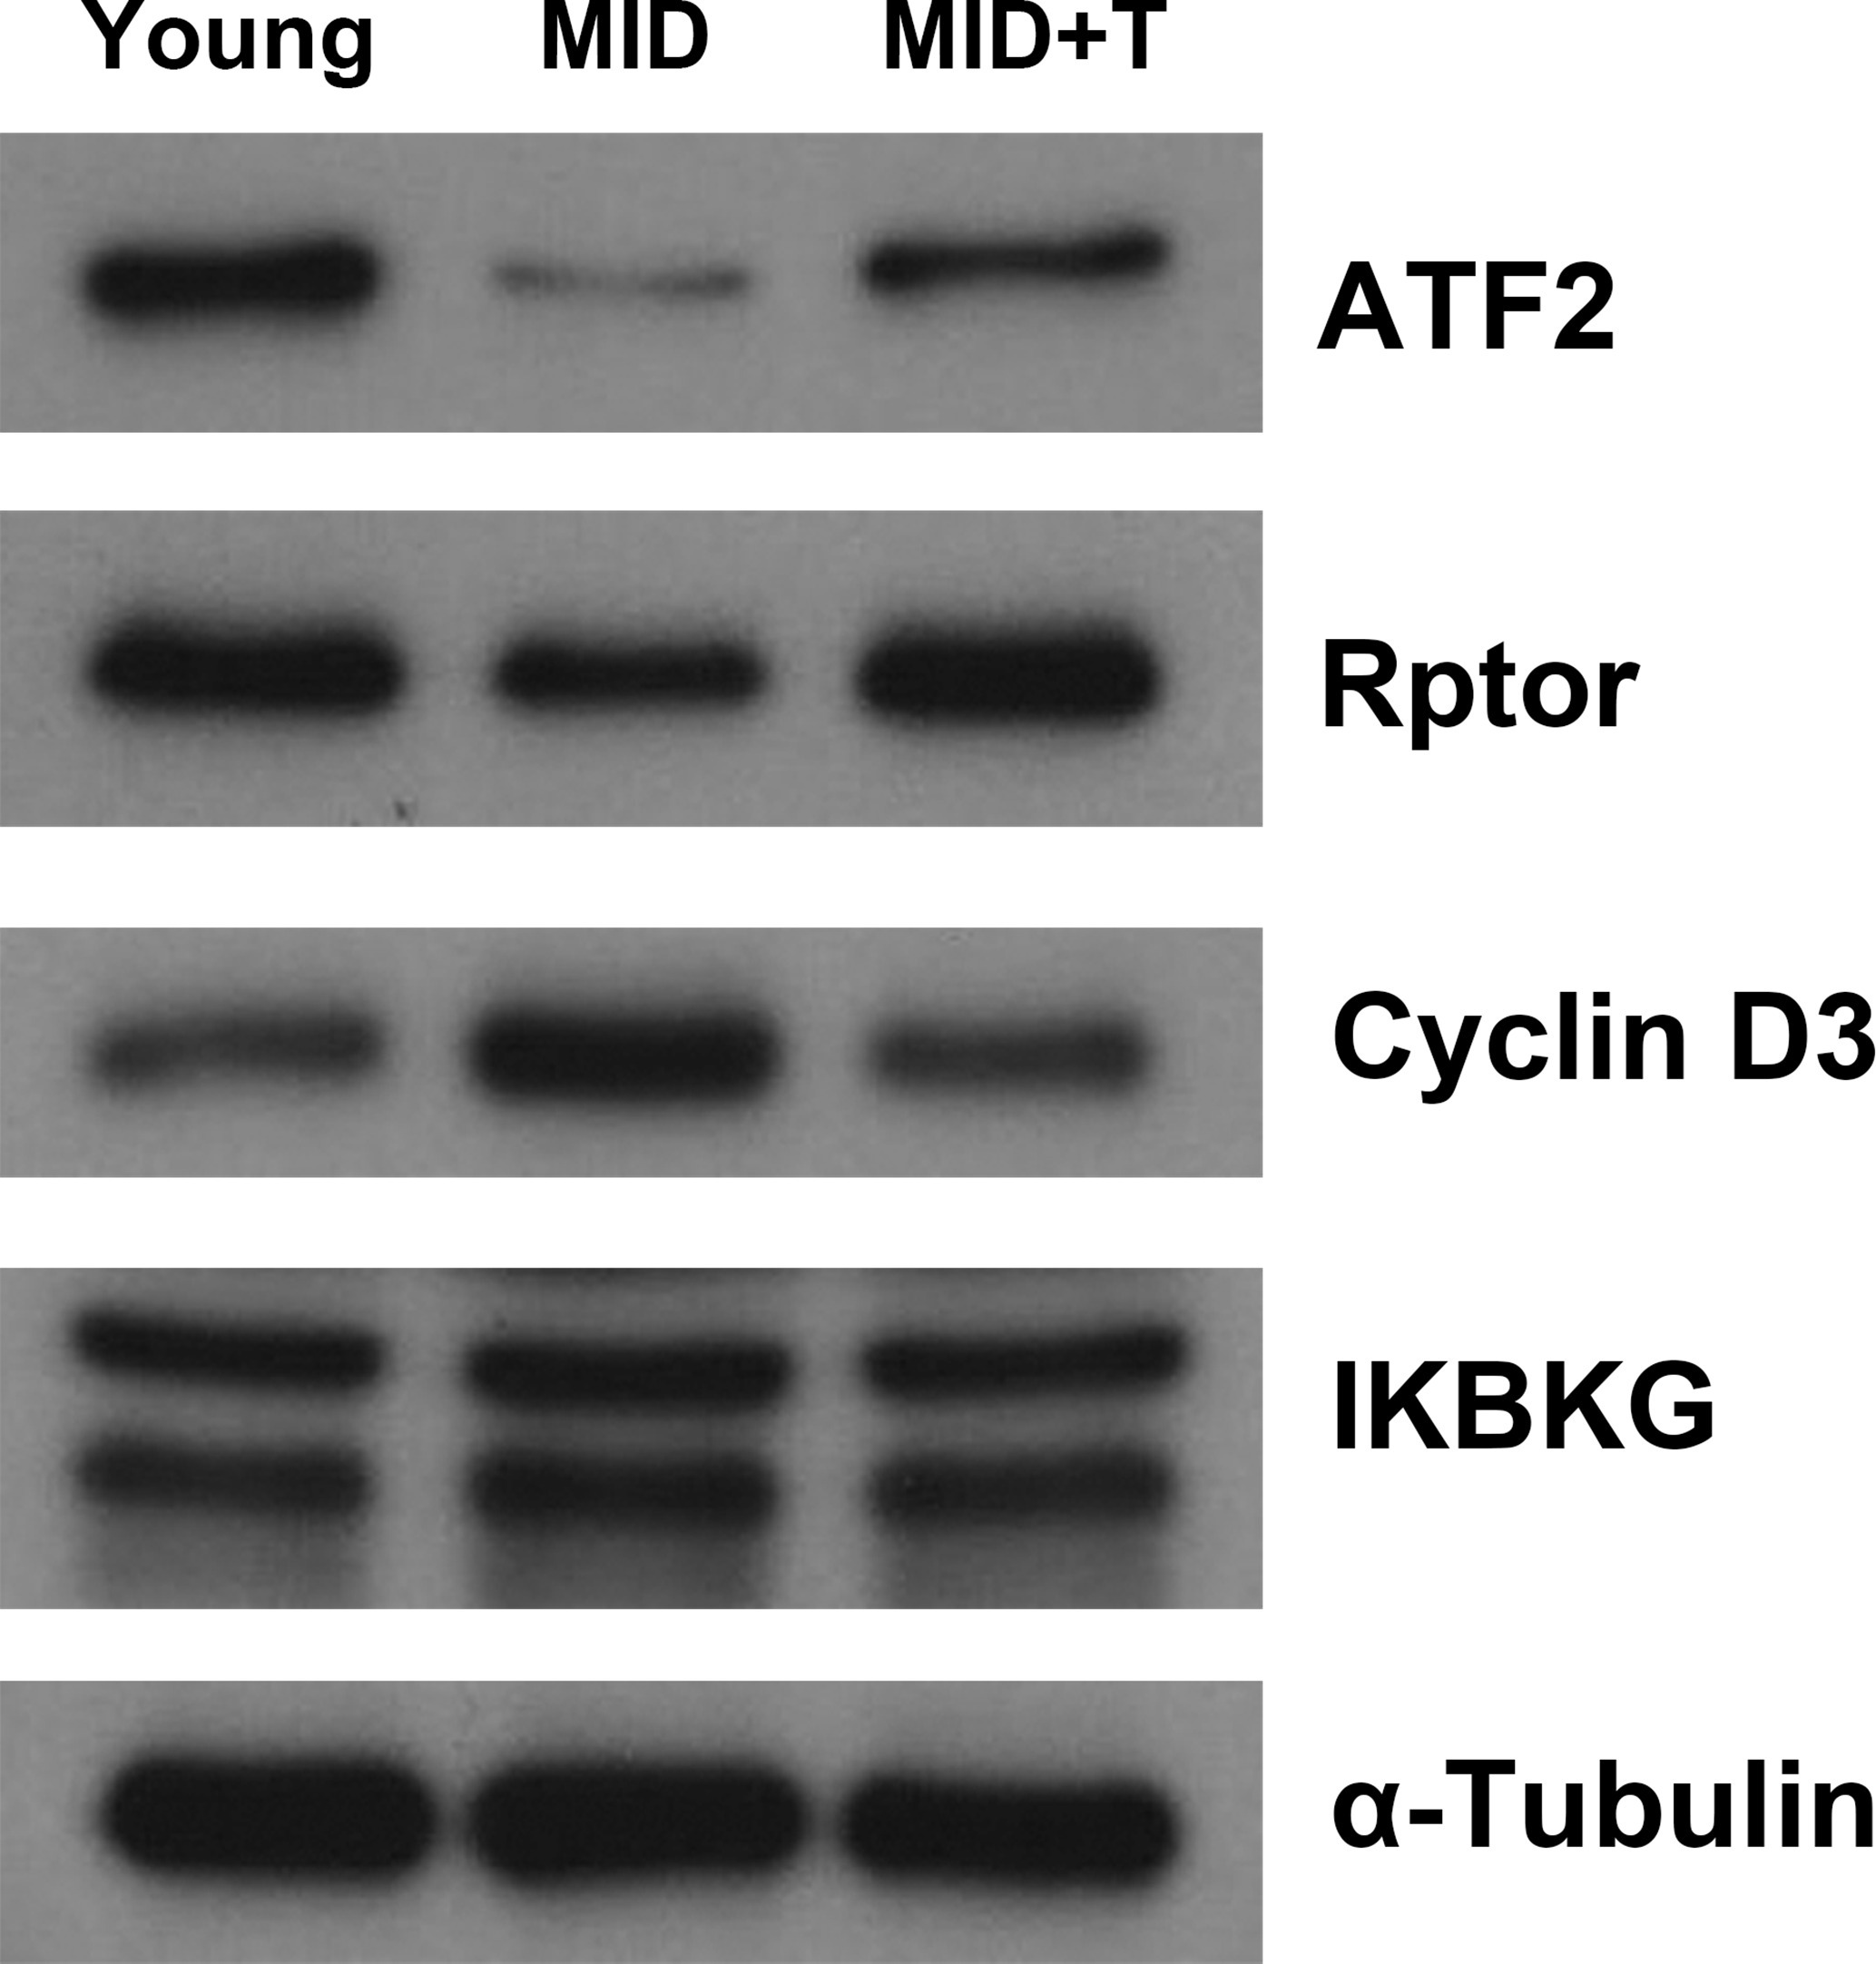 Fig. 7 
            The protein expression level of activating transcription factor 2 (Atf2), Regulatory Associated Protein Of MTOR Complex 1 (Rptor), inhibitor of nuclear factor kappa B kinase regulatory subunit γ (Ikbkg), and Cyclin D3 (Ccnd3) genes in satellite cells (SCs) from young, MID, and MID+ T groups by western blot assay. The seven-day cultured SCs from each group were lysed and the lysate was subjected to western blot assay with the indicated antibodies. α-Tubulin served as an internal control for amounts of protein loaded on the gel.
          